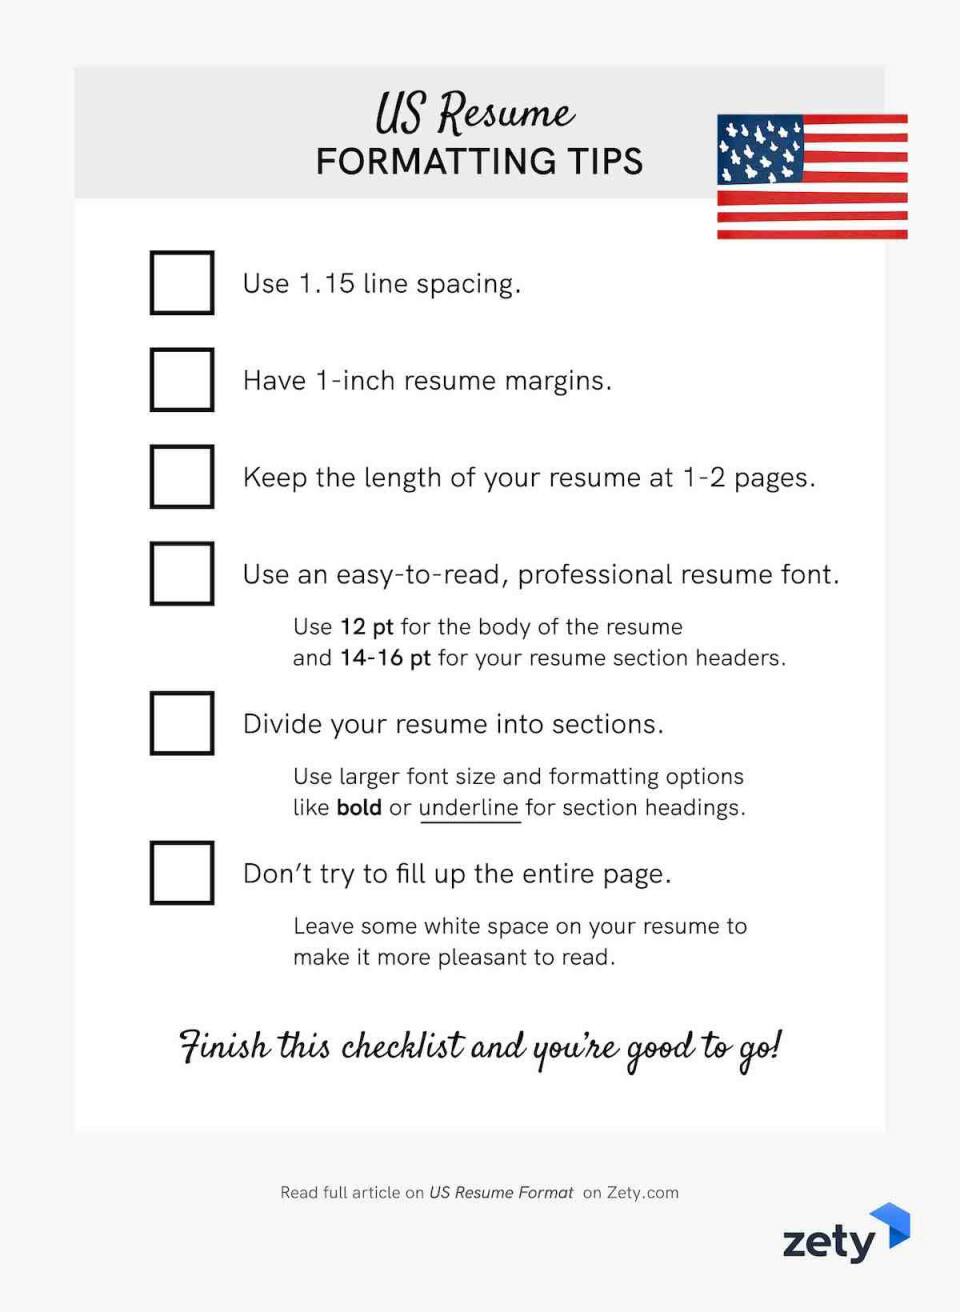 US Resume Format (American Style Resume Template)